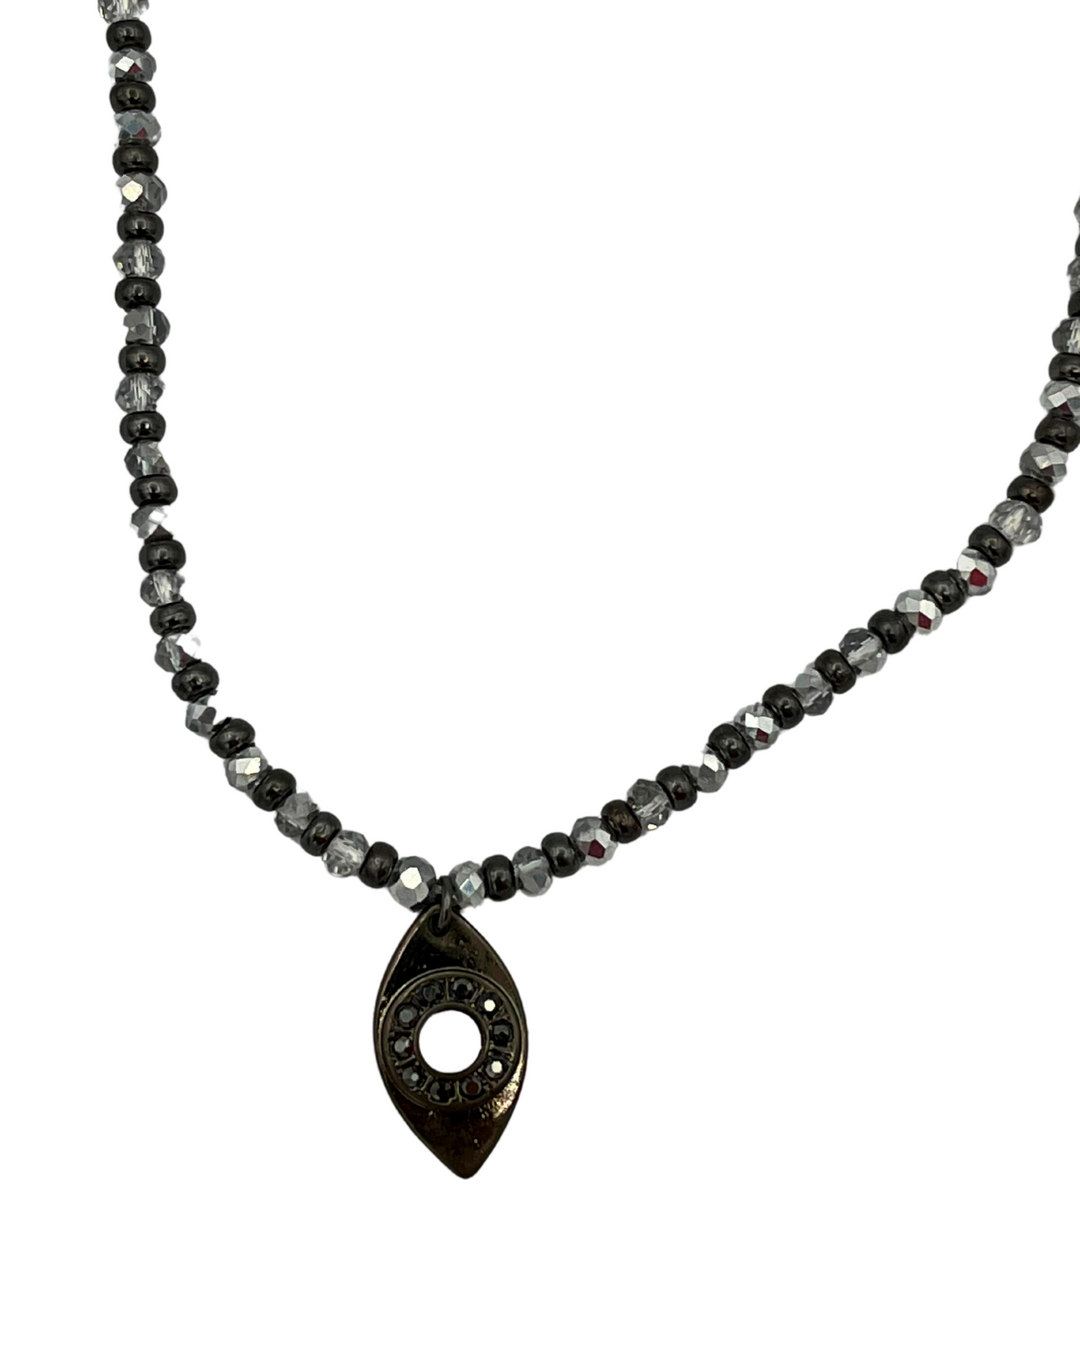 Silver Beaded Necklace With Eye Pendant